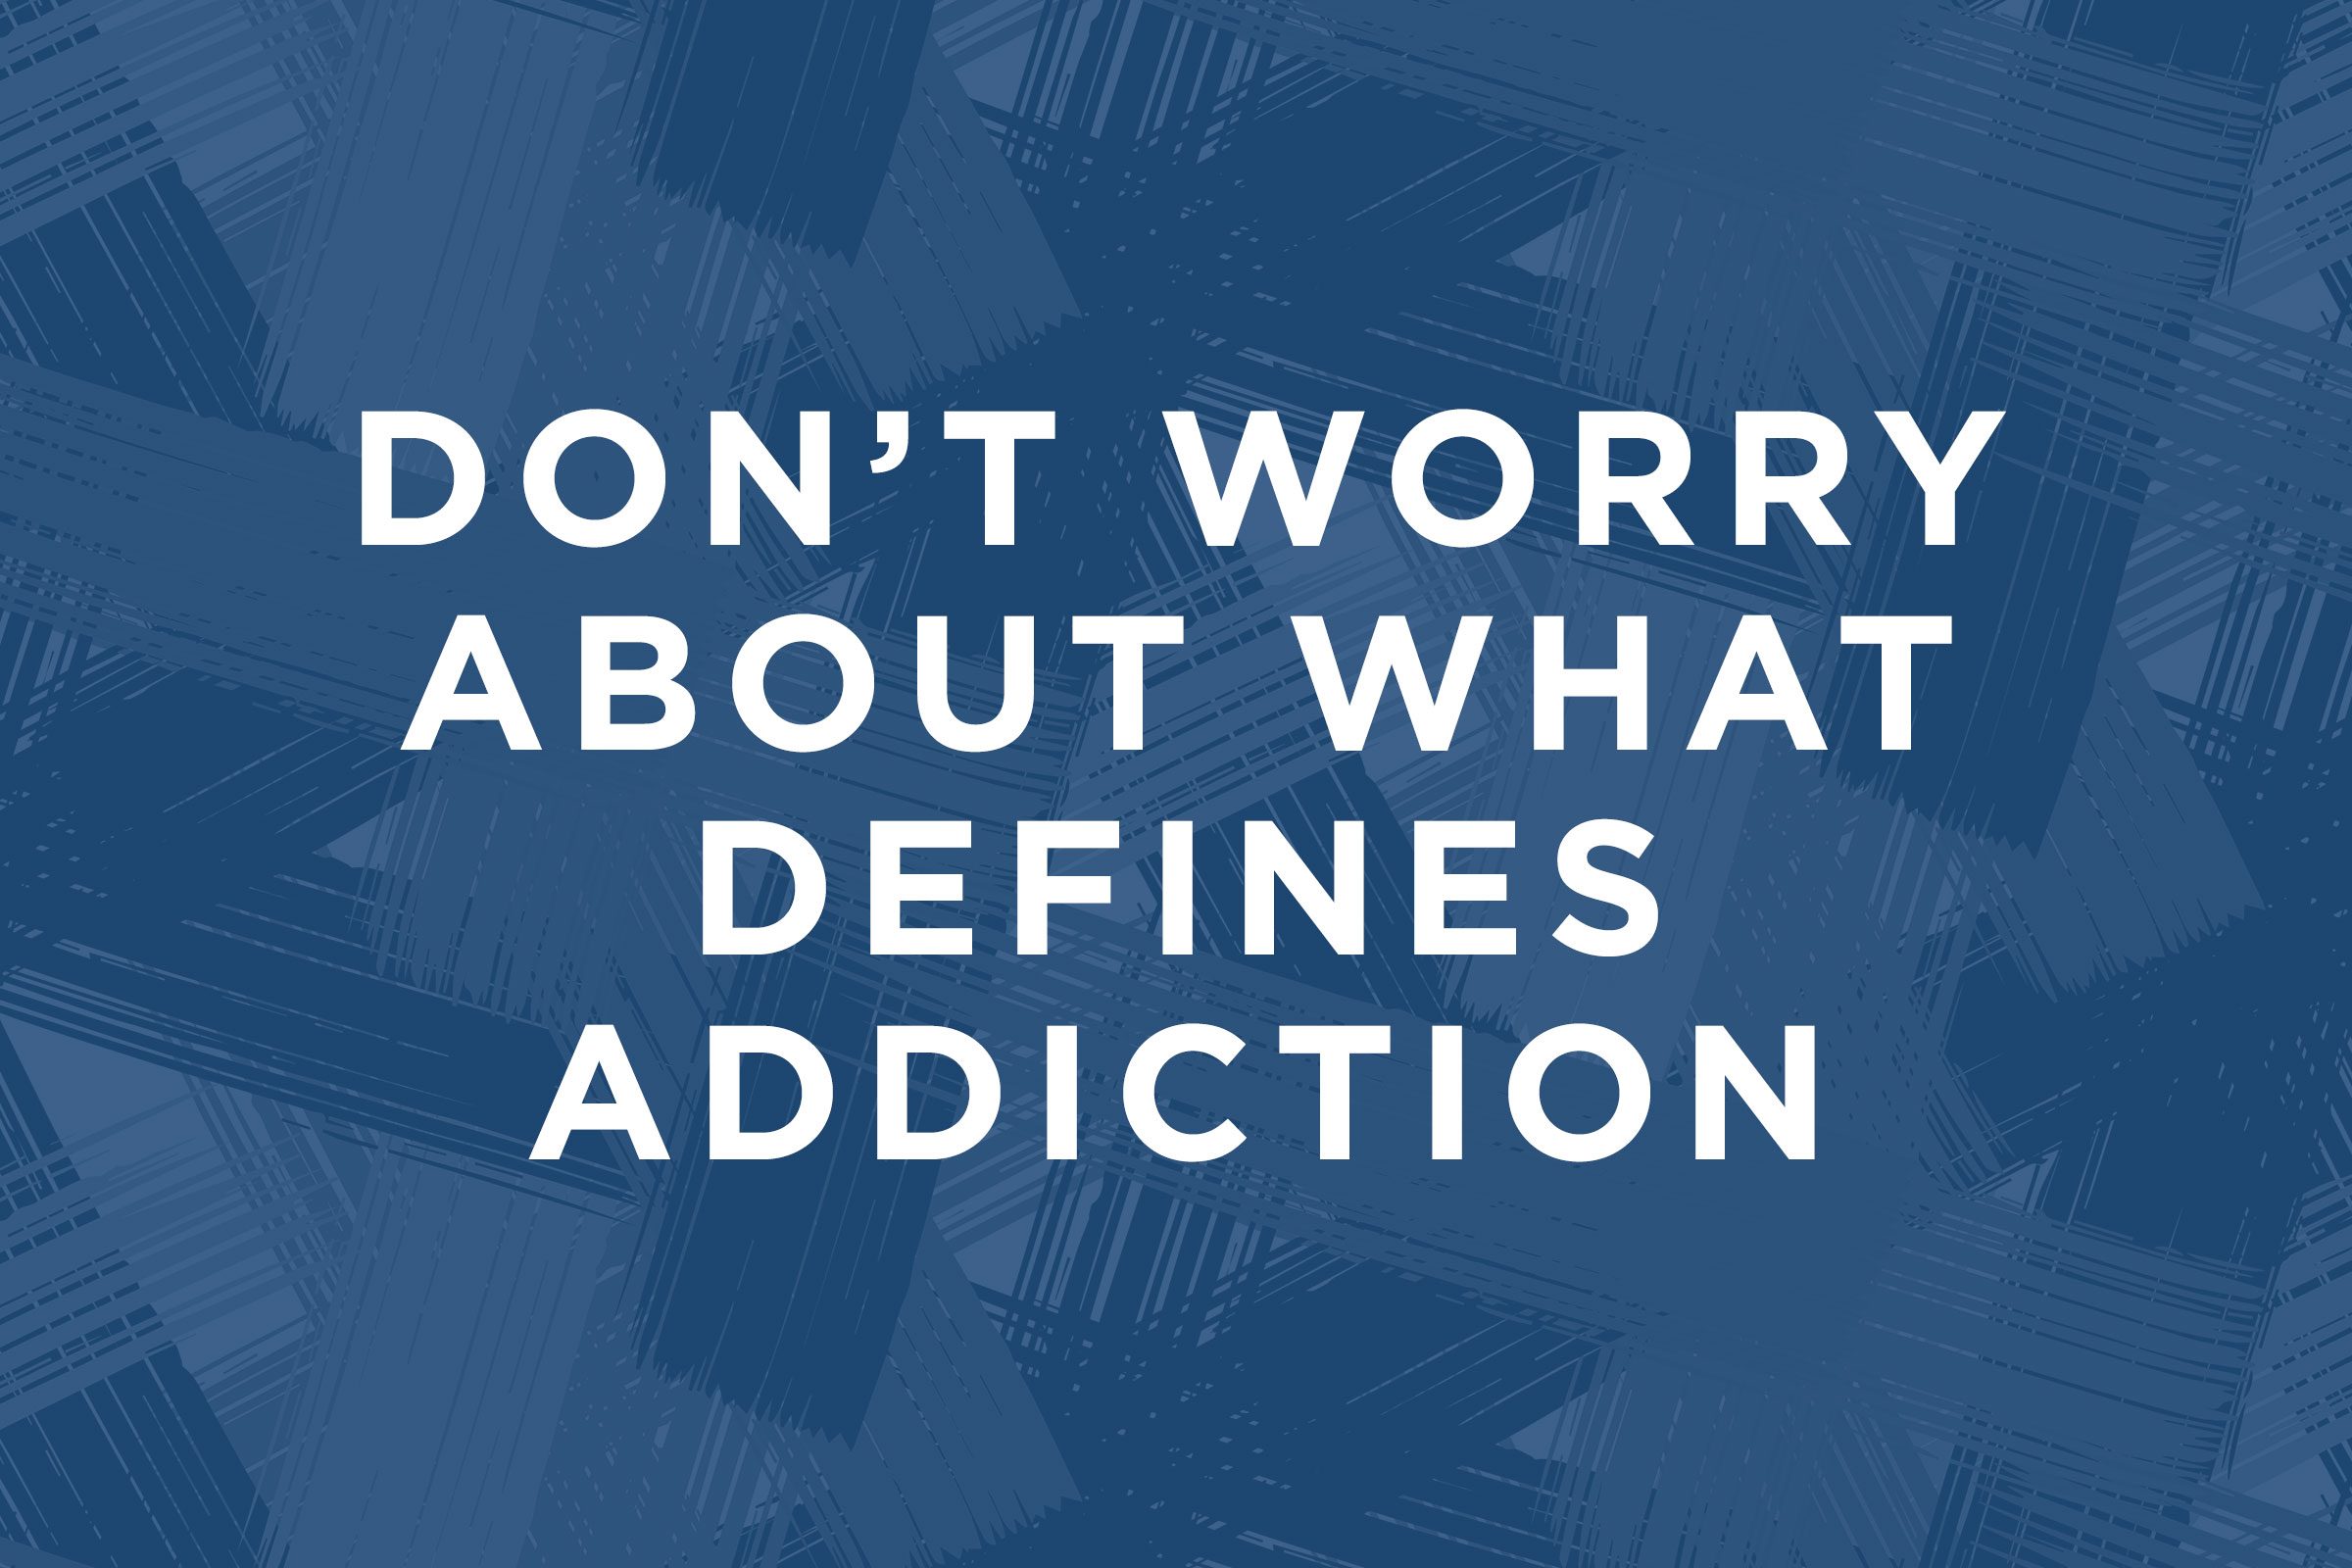 You have an addiction, not a medical condition